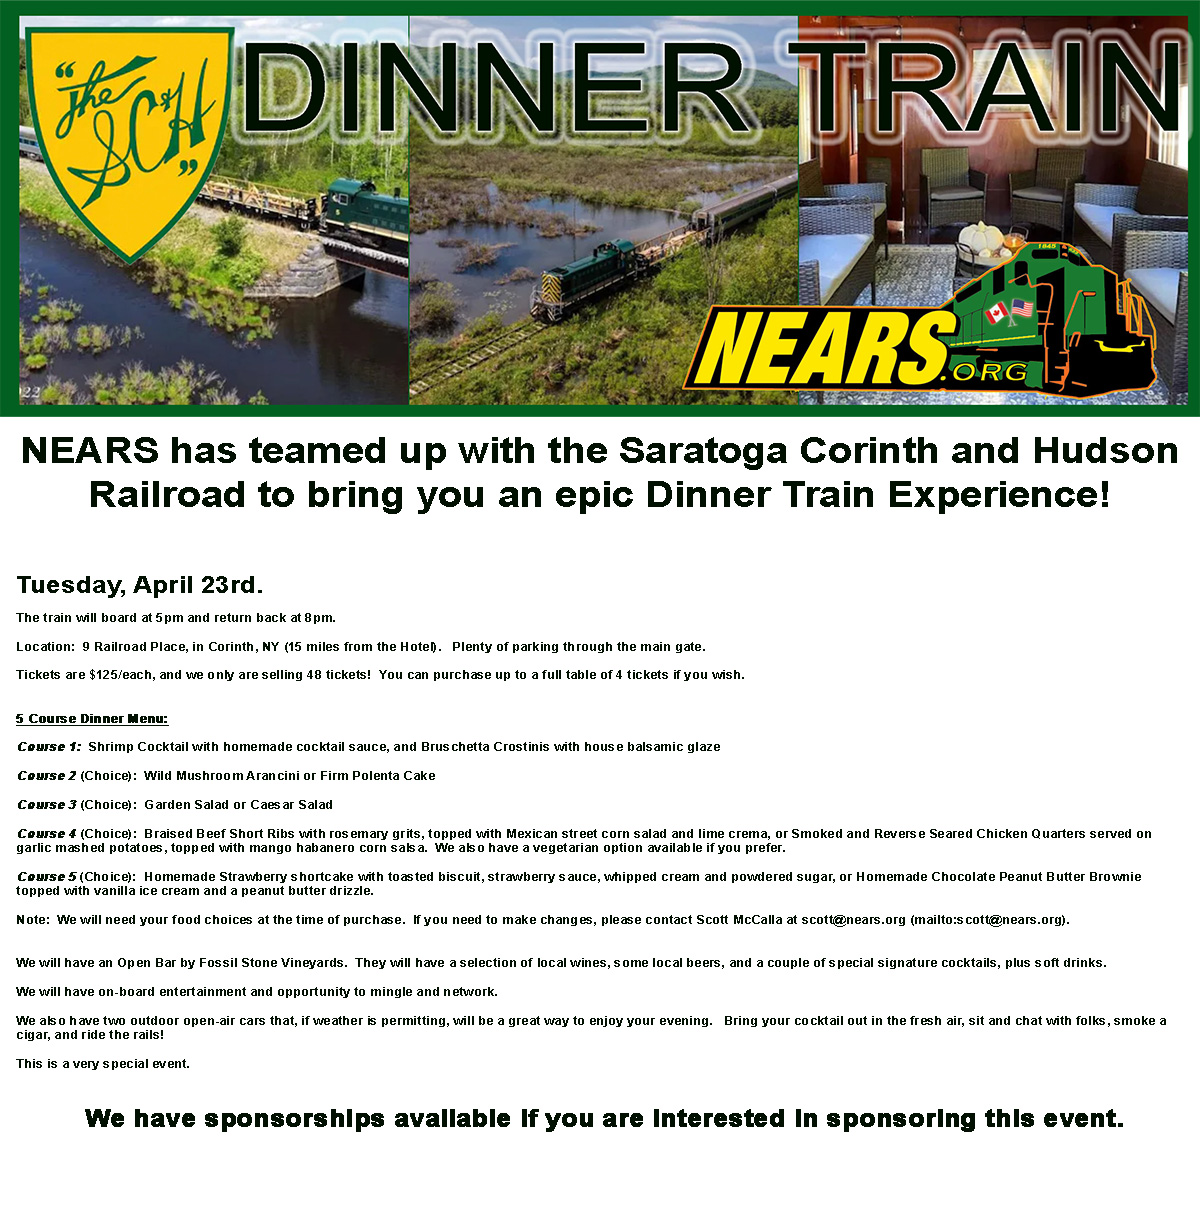 DINNER TRAIN WITH TEXT